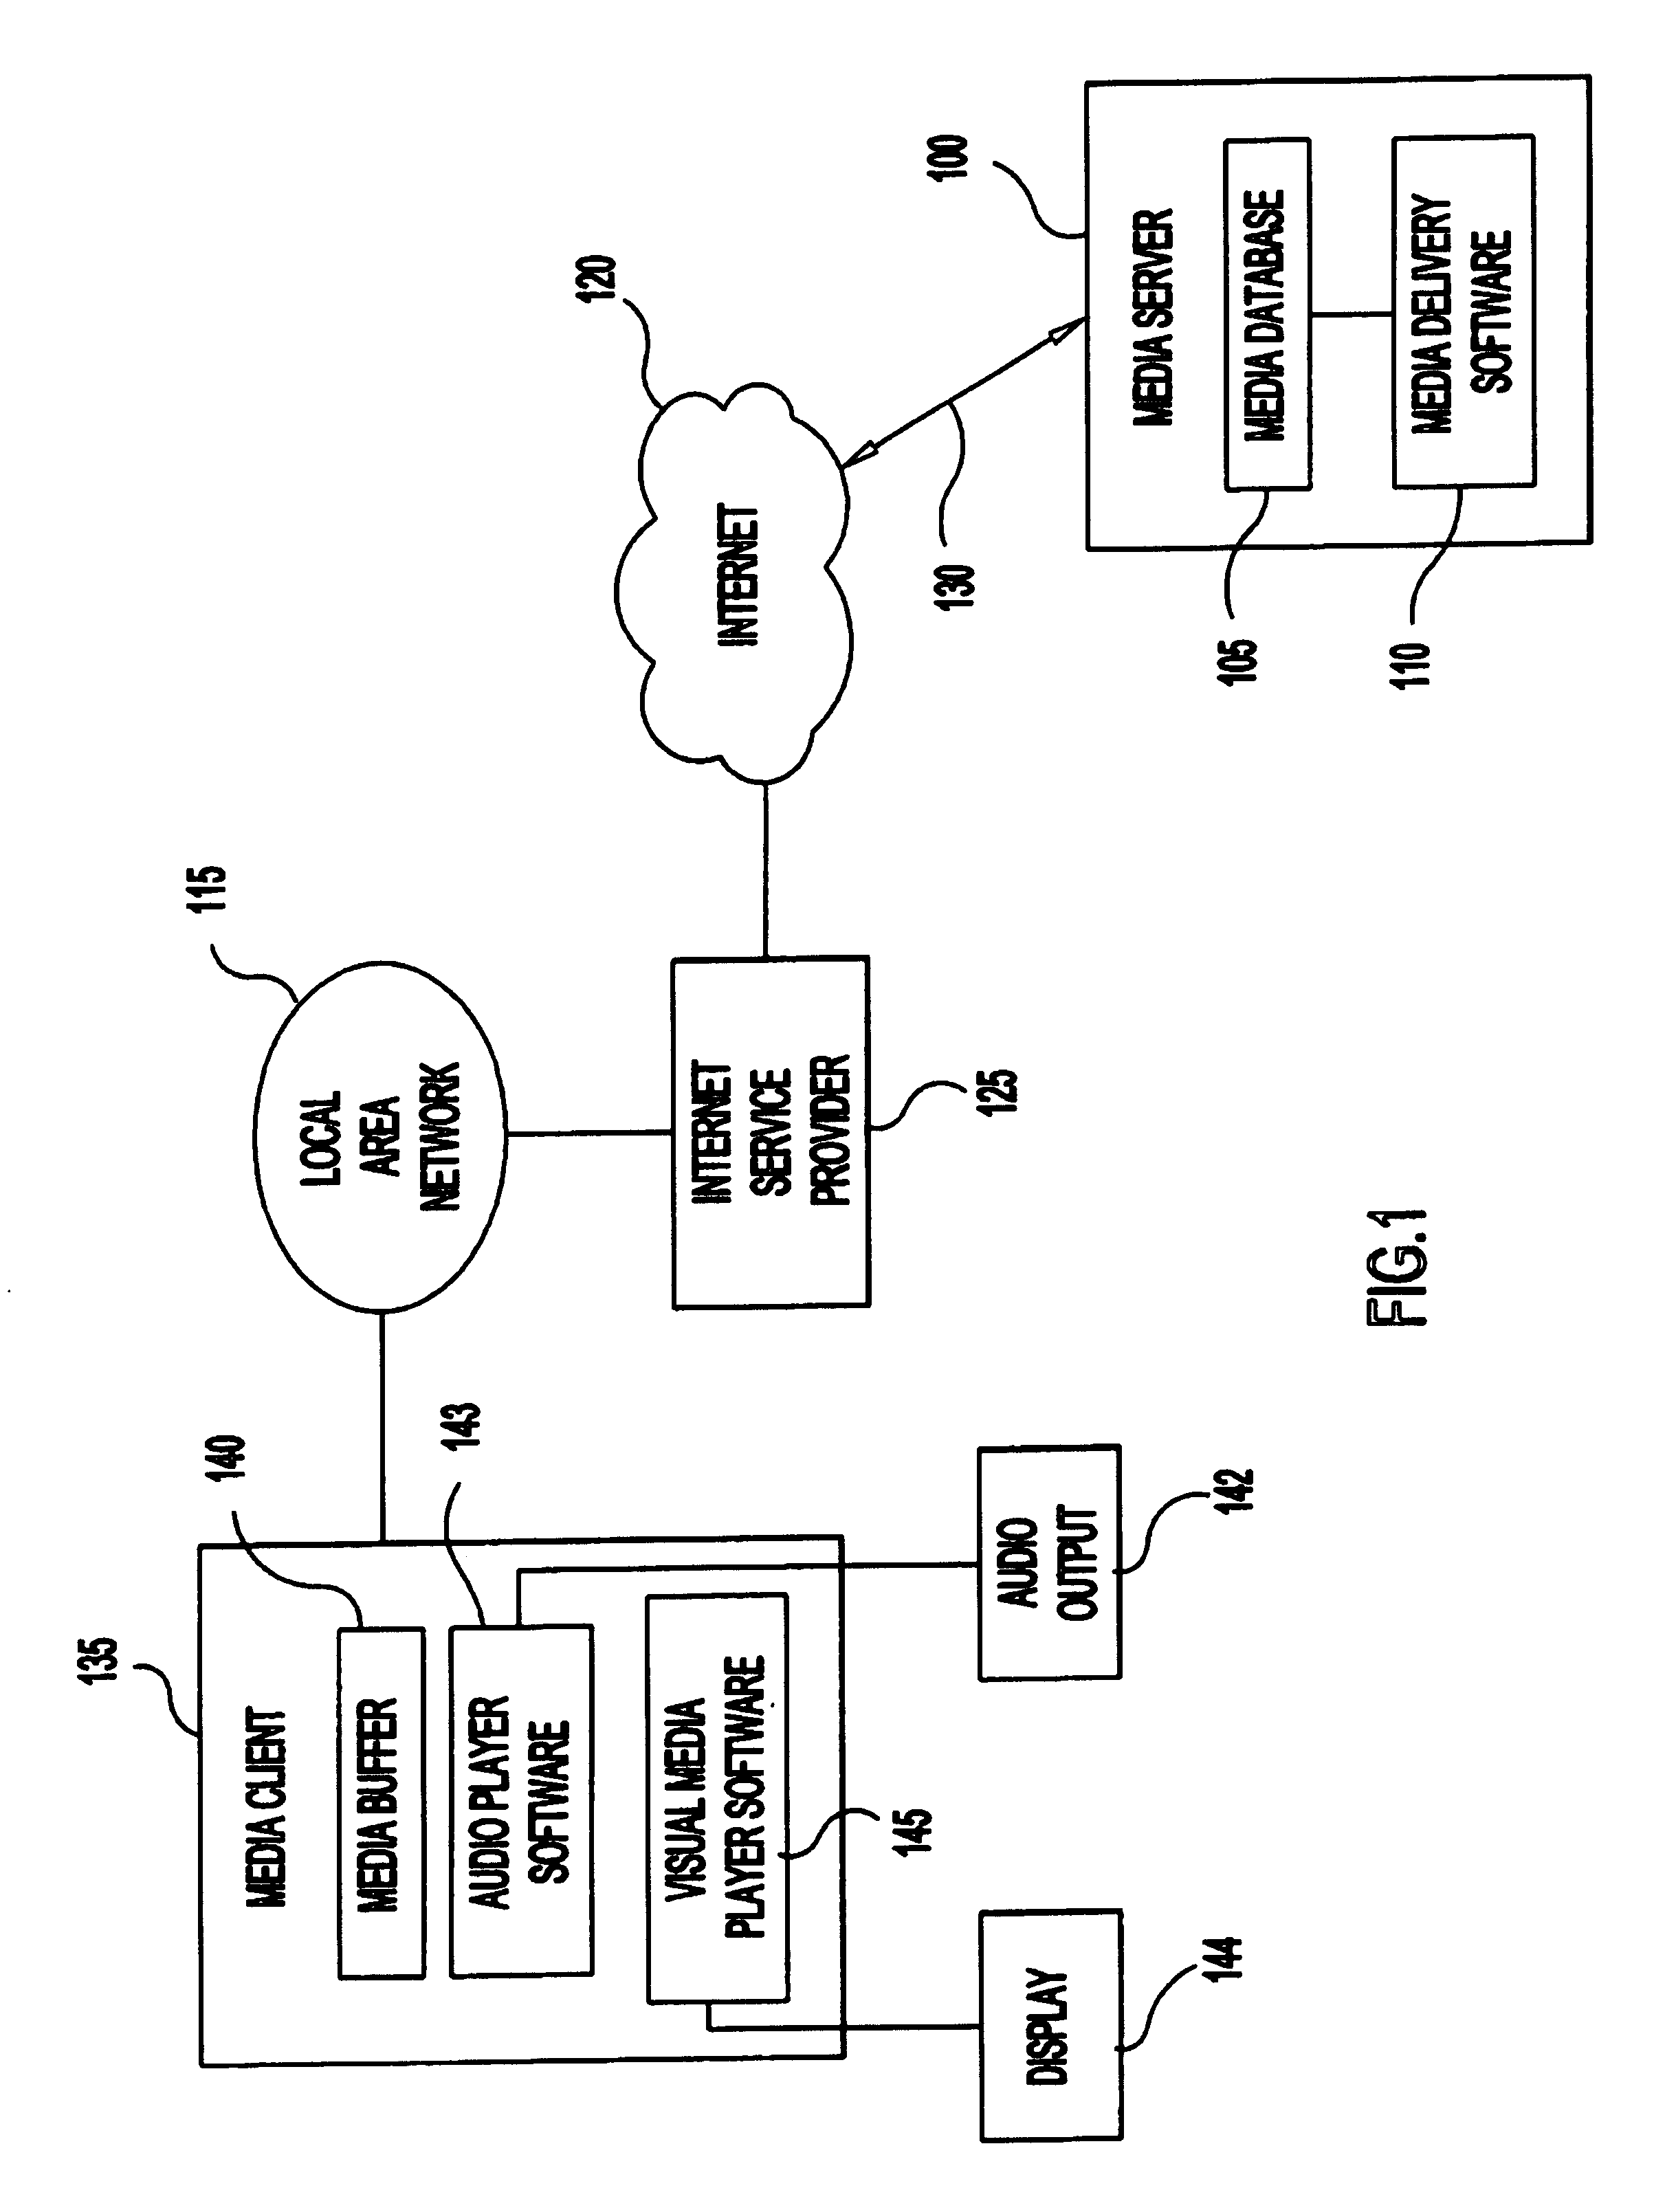 Packet scheduling system and method for multimedia data